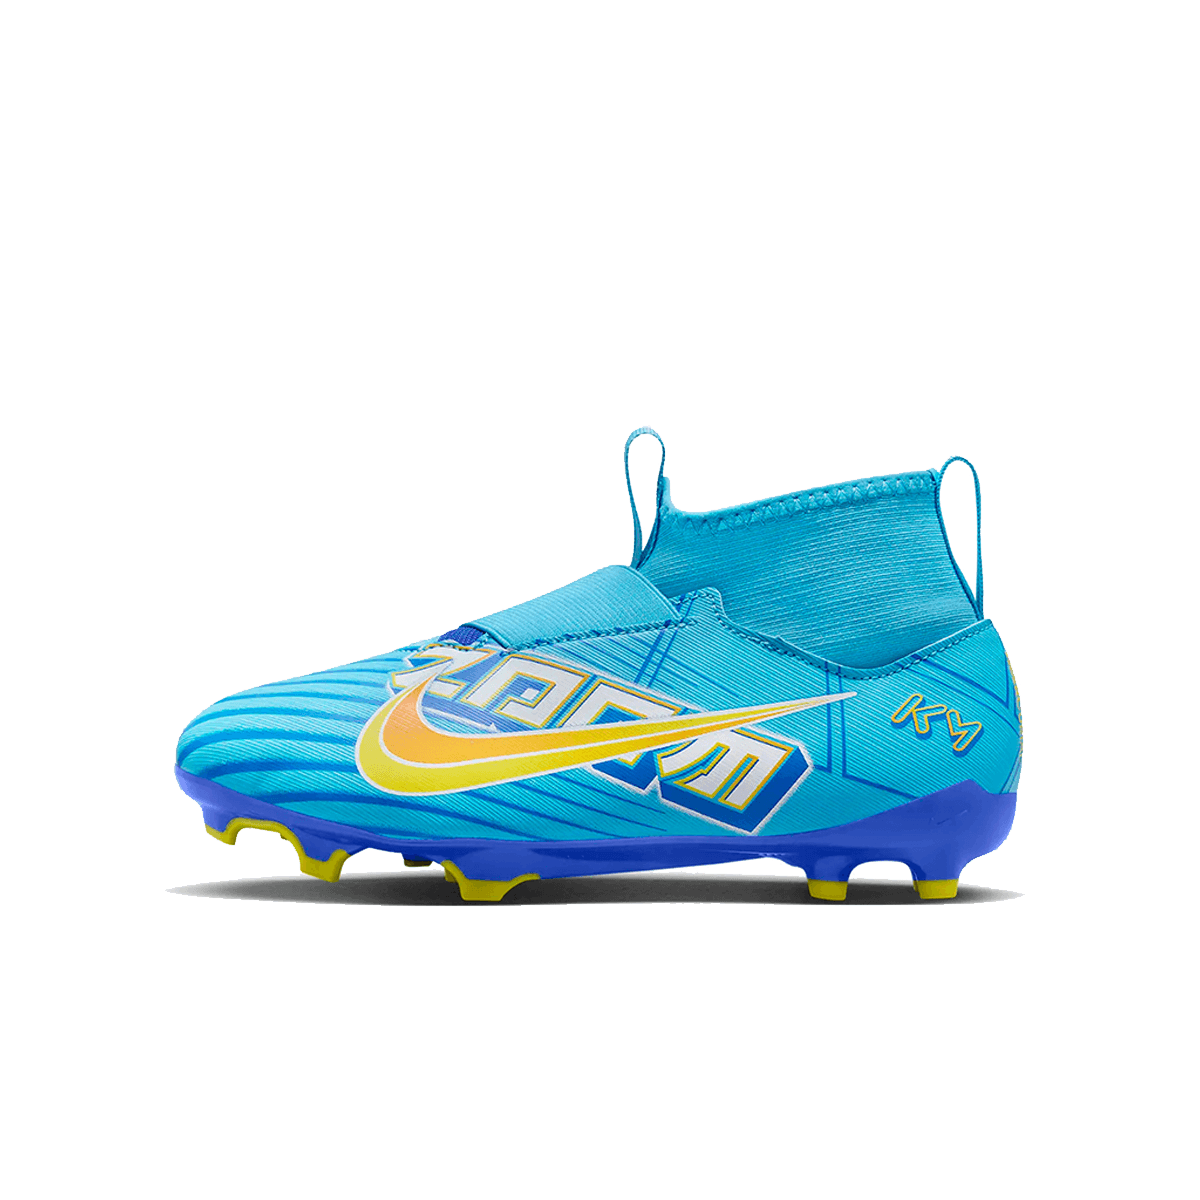 JR ZM SUPERFLY 9 ACAD KM FGMG